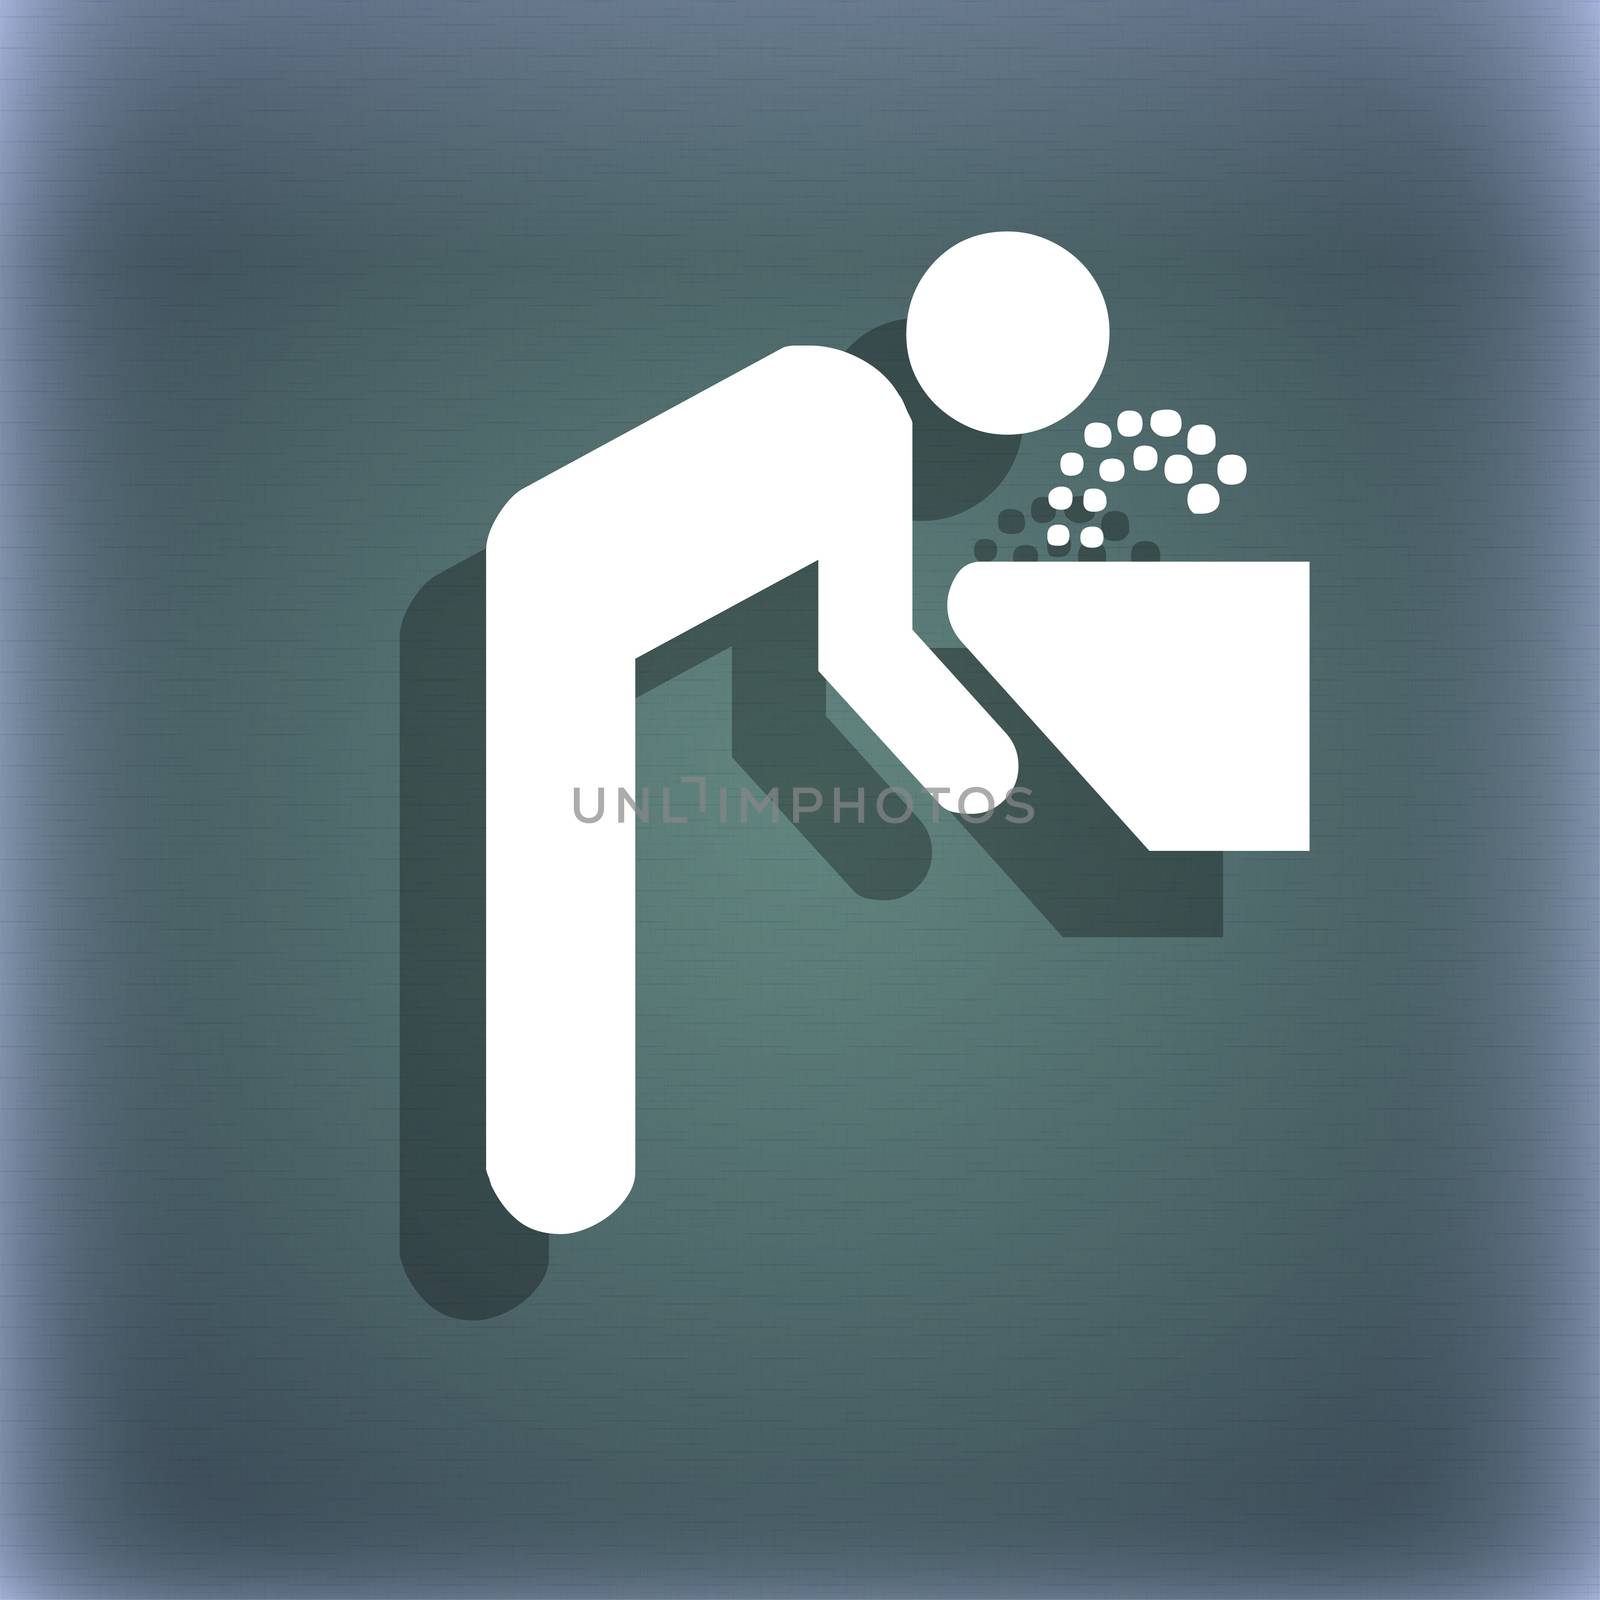 drinking fountain icon symbol on the blue-green abstract background with shadow and space for your text. illustration